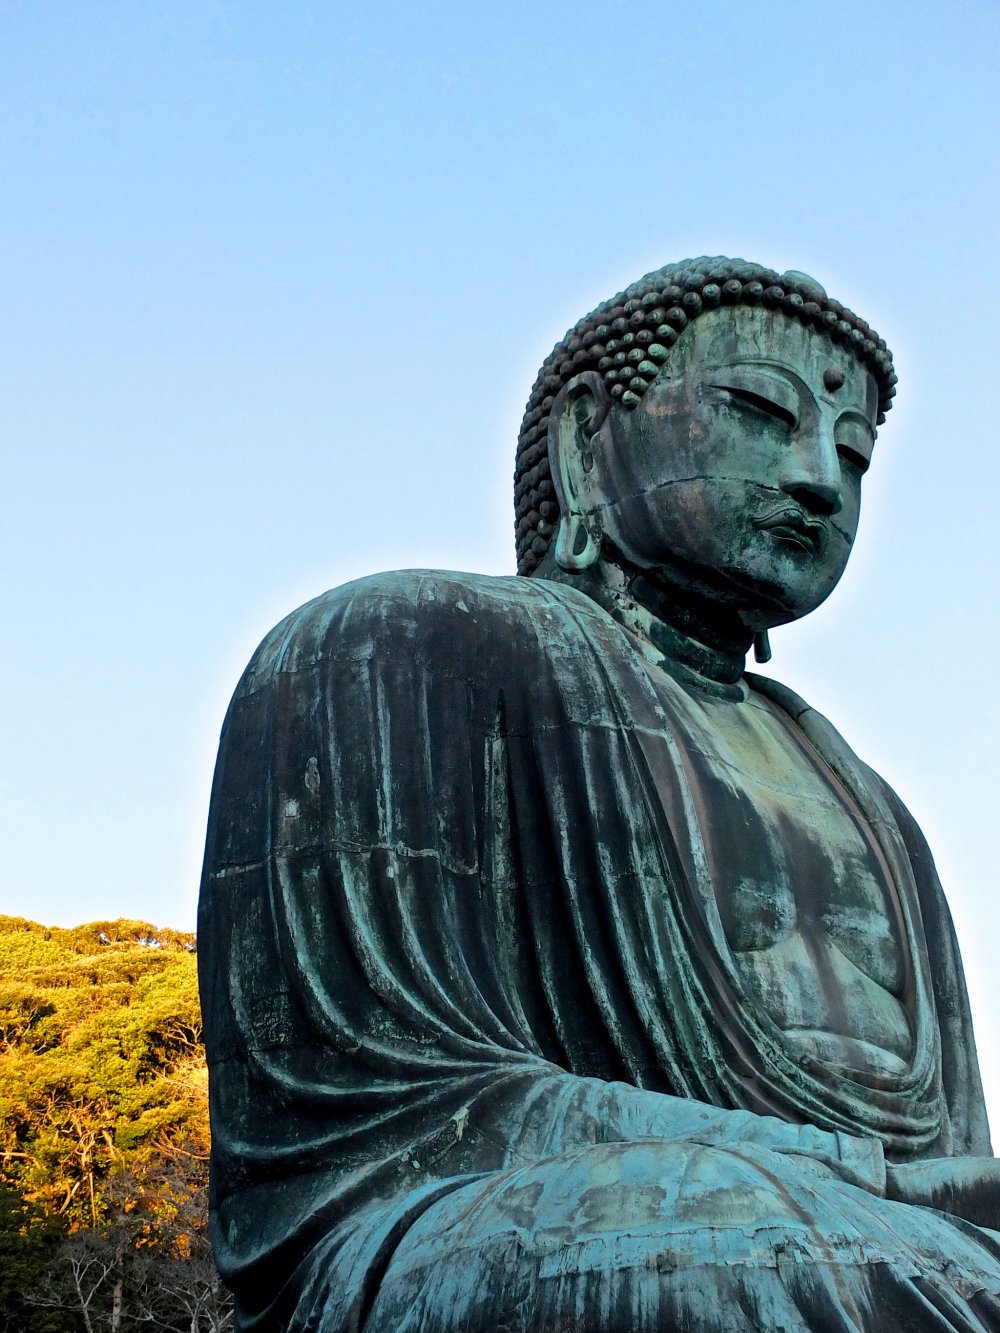 Daibutsu: Bold and strong against a blue December sky